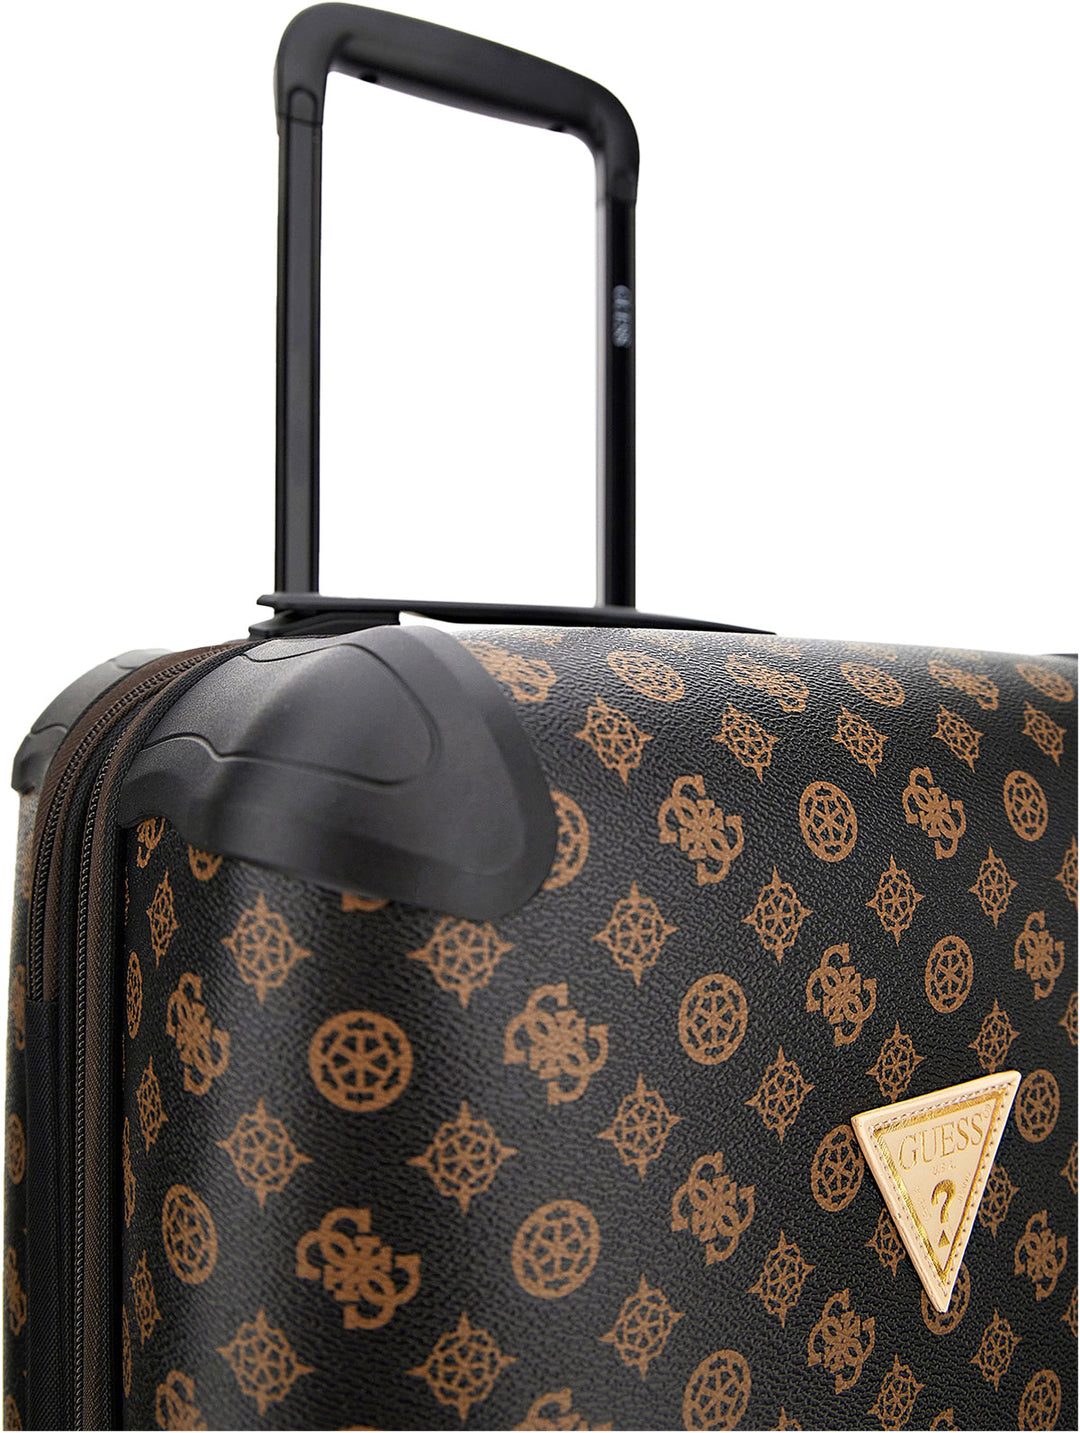 Guess Wilder 18 Inch Travel Luggage In Choco Brown 4G